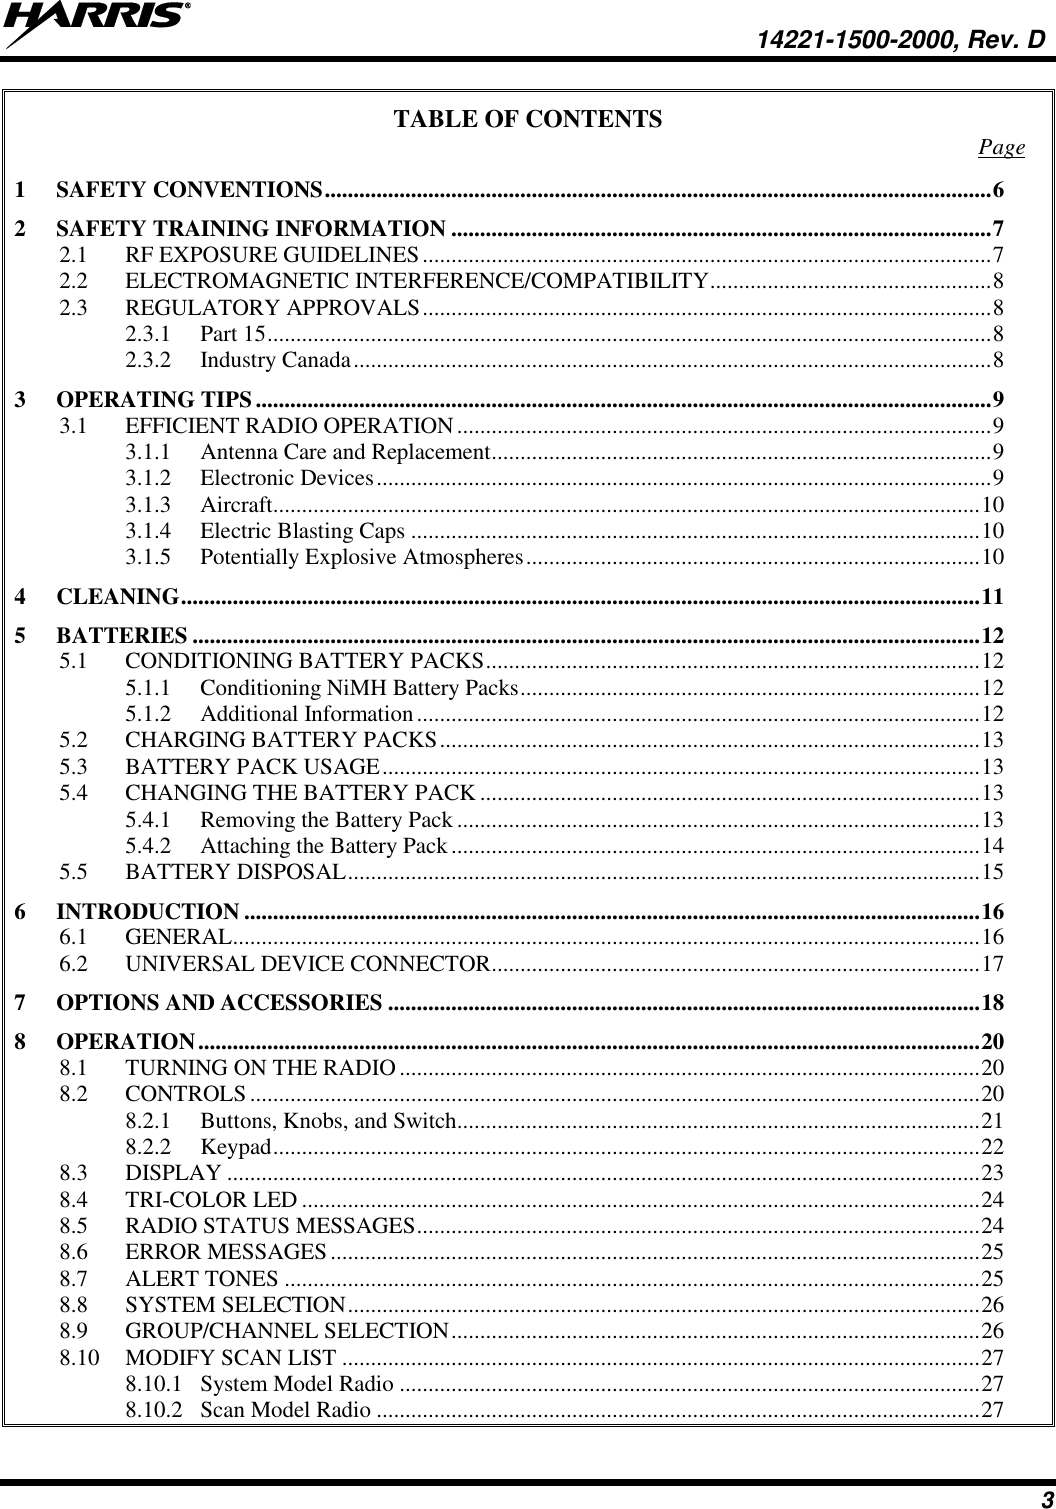   14221-1500-2000, Rev. D 3 TABLE OF CONTENTS  Page 1 SAFETY CONVENTIONS .................................................................................................................... 6 2 SAFETY TRAINING INFORMATION .............................................................................................. 7 2.1 RF EXPOSURE GUIDELINES ................................................................................................... 7 2.2 ELECTROMAGNETIC INTERFERENCE/COMPATIBILITY ................................................. 8 2.3 REGULATORY APPROVALS ................................................................................................... 8 2.3.1 Part 15 .............................................................................................................................. 8 2.3.2 Industry Canada ............................................................................................................... 8 3 OPERATING TIPS ................................................................................................................................ 9 3.1 EFFICIENT RADIO OPERATION ............................................................................................. 9 3.1.1 Antenna Care and Replacement ....................................................................................... 9 3.1.2 Electronic Devices ........................................................................................................... 9 3.1.3 Aircraft........................................................................................................................... 10 3.1.4 Electric Blasting Caps ................................................................................................... 10 3.1.5 Potentially Explosive Atmospheres ............................................................................... 10 4 CLEANING ........................................................................................................................................... 11 5 BATTERIES ......................................................................................................................................... 12 5.1 CONDITIONING BATTERY PACKS ...................................................................................... 12 5.1.1 Conditioning NiMH Battery Packs ................................................................................ 12 5.1.2 Additional Information .................................................................................................. 12 5.2 CHARGING BATTERY PACKS .............................................................................................. 13 5.3 BATTERY PACK USAGE ........................................................................................................ 13 5.4 CHANGING THE BATTERY PACK ....................................................................................... 13 5.4.1 Removing the Battery Pack ........................................................................................... 13 5.4.2 Attaching the Battery Pack ............................................................................................ 14 5.5 BATTERY DISPOSAL .............................................................................................................. 15 6 INTRODUCTION ................................................................................................................................ 16 6.1 GENERAL .................................................................................................................................. 16 6.2 UNIVERSAL DEVICE CONNECTOR ..................................................................................... 17 7 OPTIONS AND ACCESSORIES ....................................................................................................... 18 8 OPERATION ........................................................................................................................................ 20 8.1 TURNING ON THE RADIO ..................................................................................................... 20 8.2 CONTROLS ............................................................................................................................... 20 8.2.1 Buttons, Knobs, and Switch........................................................................................... 21 8.2.2 Keypad ........................................................................................................................... 22 8.3 DISPLAY ................................................................................................................................... 23 8.4 TRI-COLOR LED ...................................................................................................................... 24 8.5 RADIO STATUS MESSAGES .................................................................................................. 24 8.6 ERROR MESSAGES ................................................................................................................. 25 8.7 ALERT TONES ......................................................................................................................... 25 8.8 SYSTEM SELECTION .............................................................................................................. 26 8.9 GROUP/CHANNEL SELECTION ............................................................................................ 26 8.10 MODIFY SCAN LIST ............................................................................................................... 27 8.10.1 System Model Radio ..................................................................................................... 27 8.10.2 Scan Model Radio ......................................................................................................... 27 